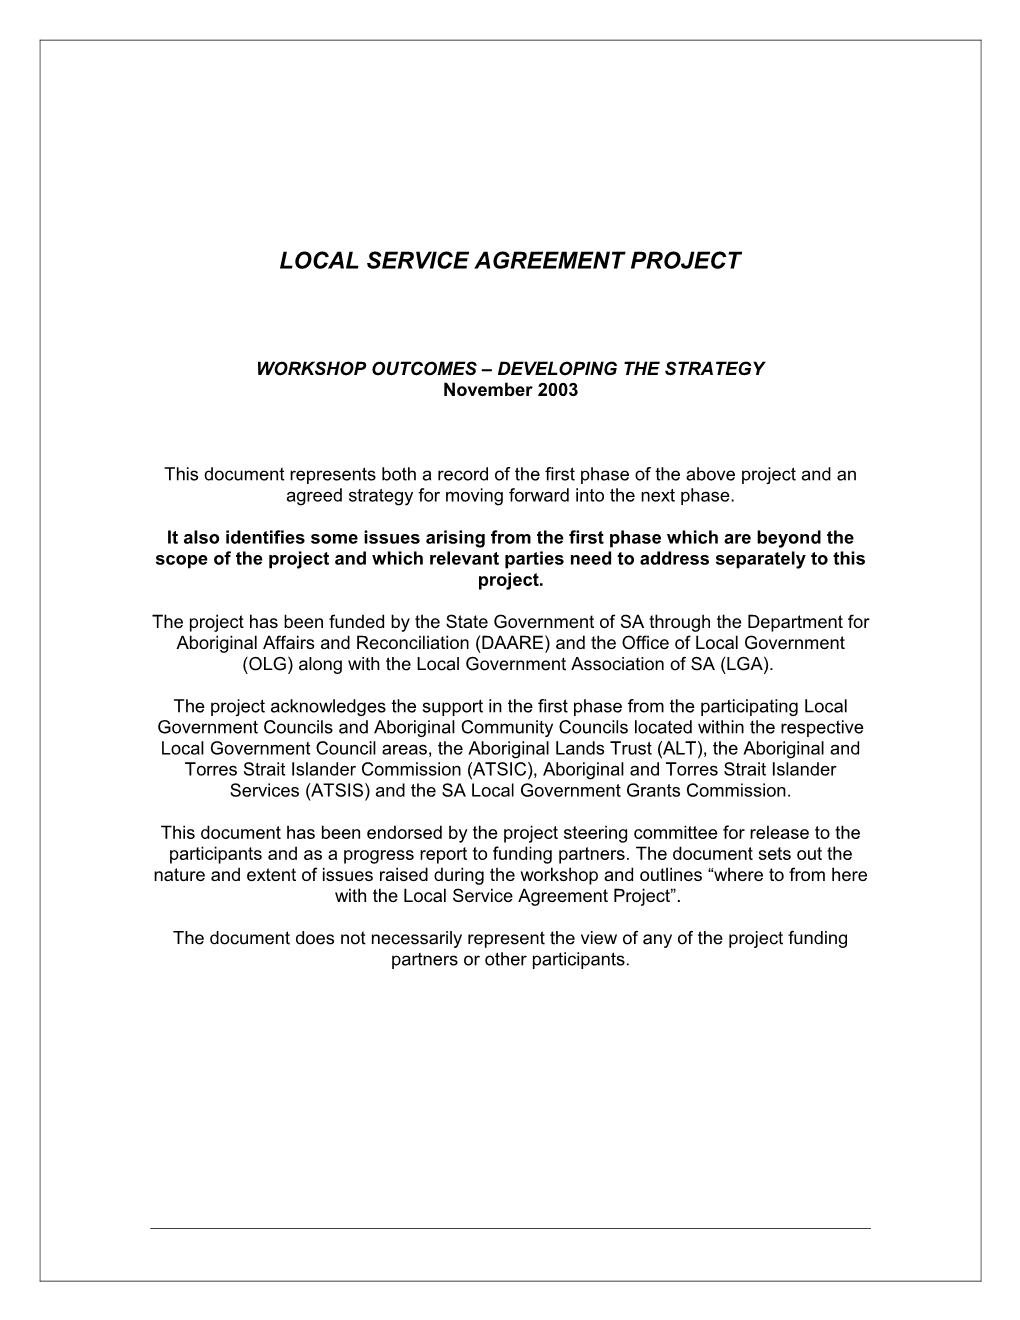 Local Services Agreement Project